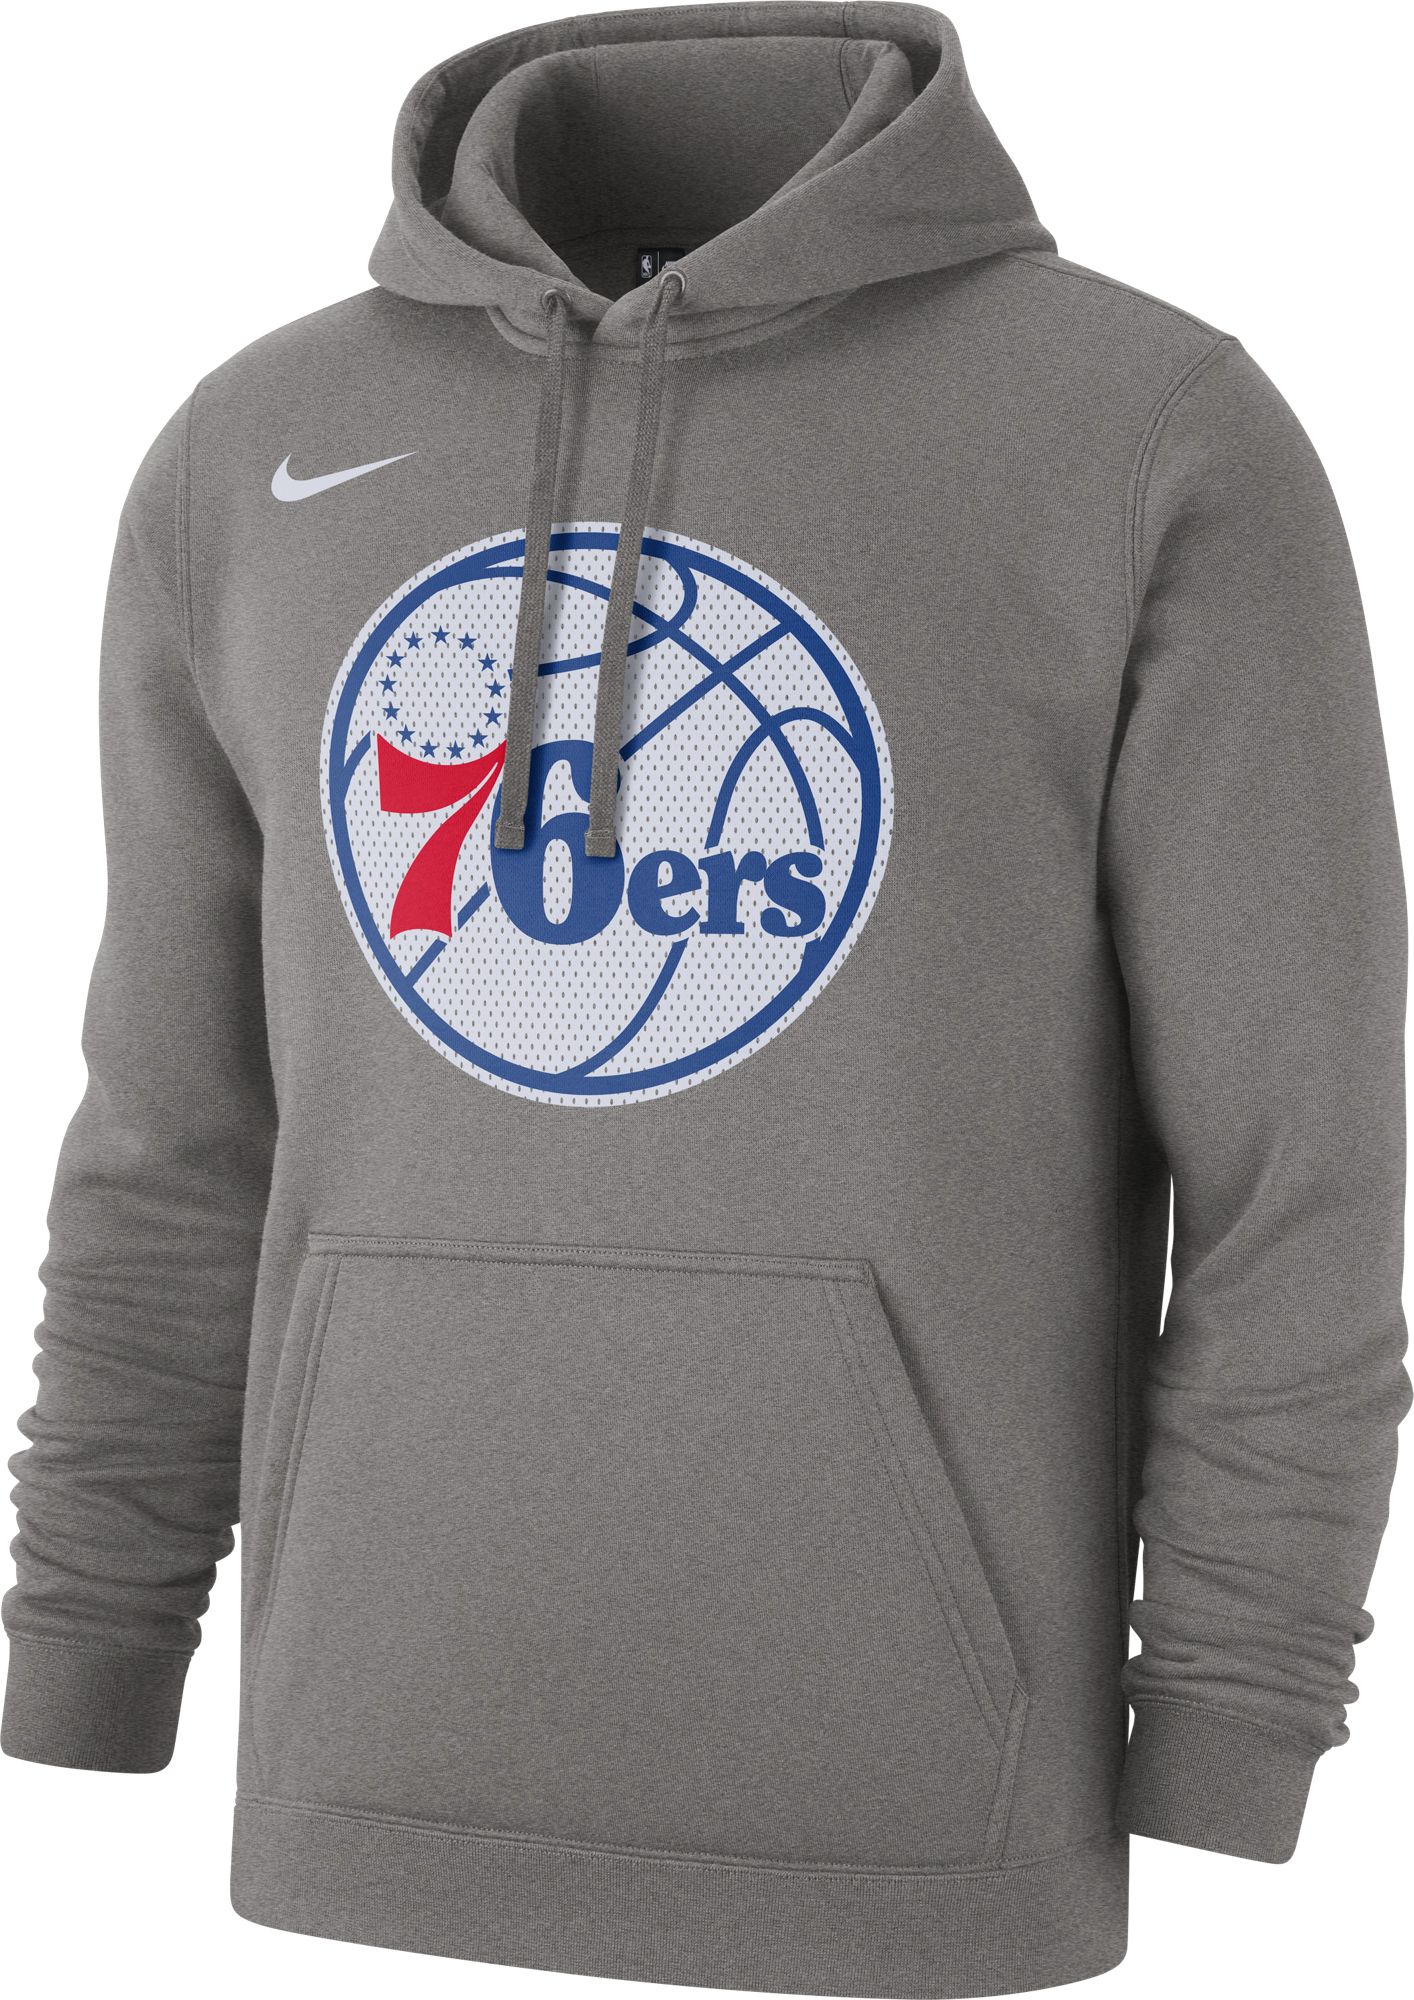 red sixers hoodie